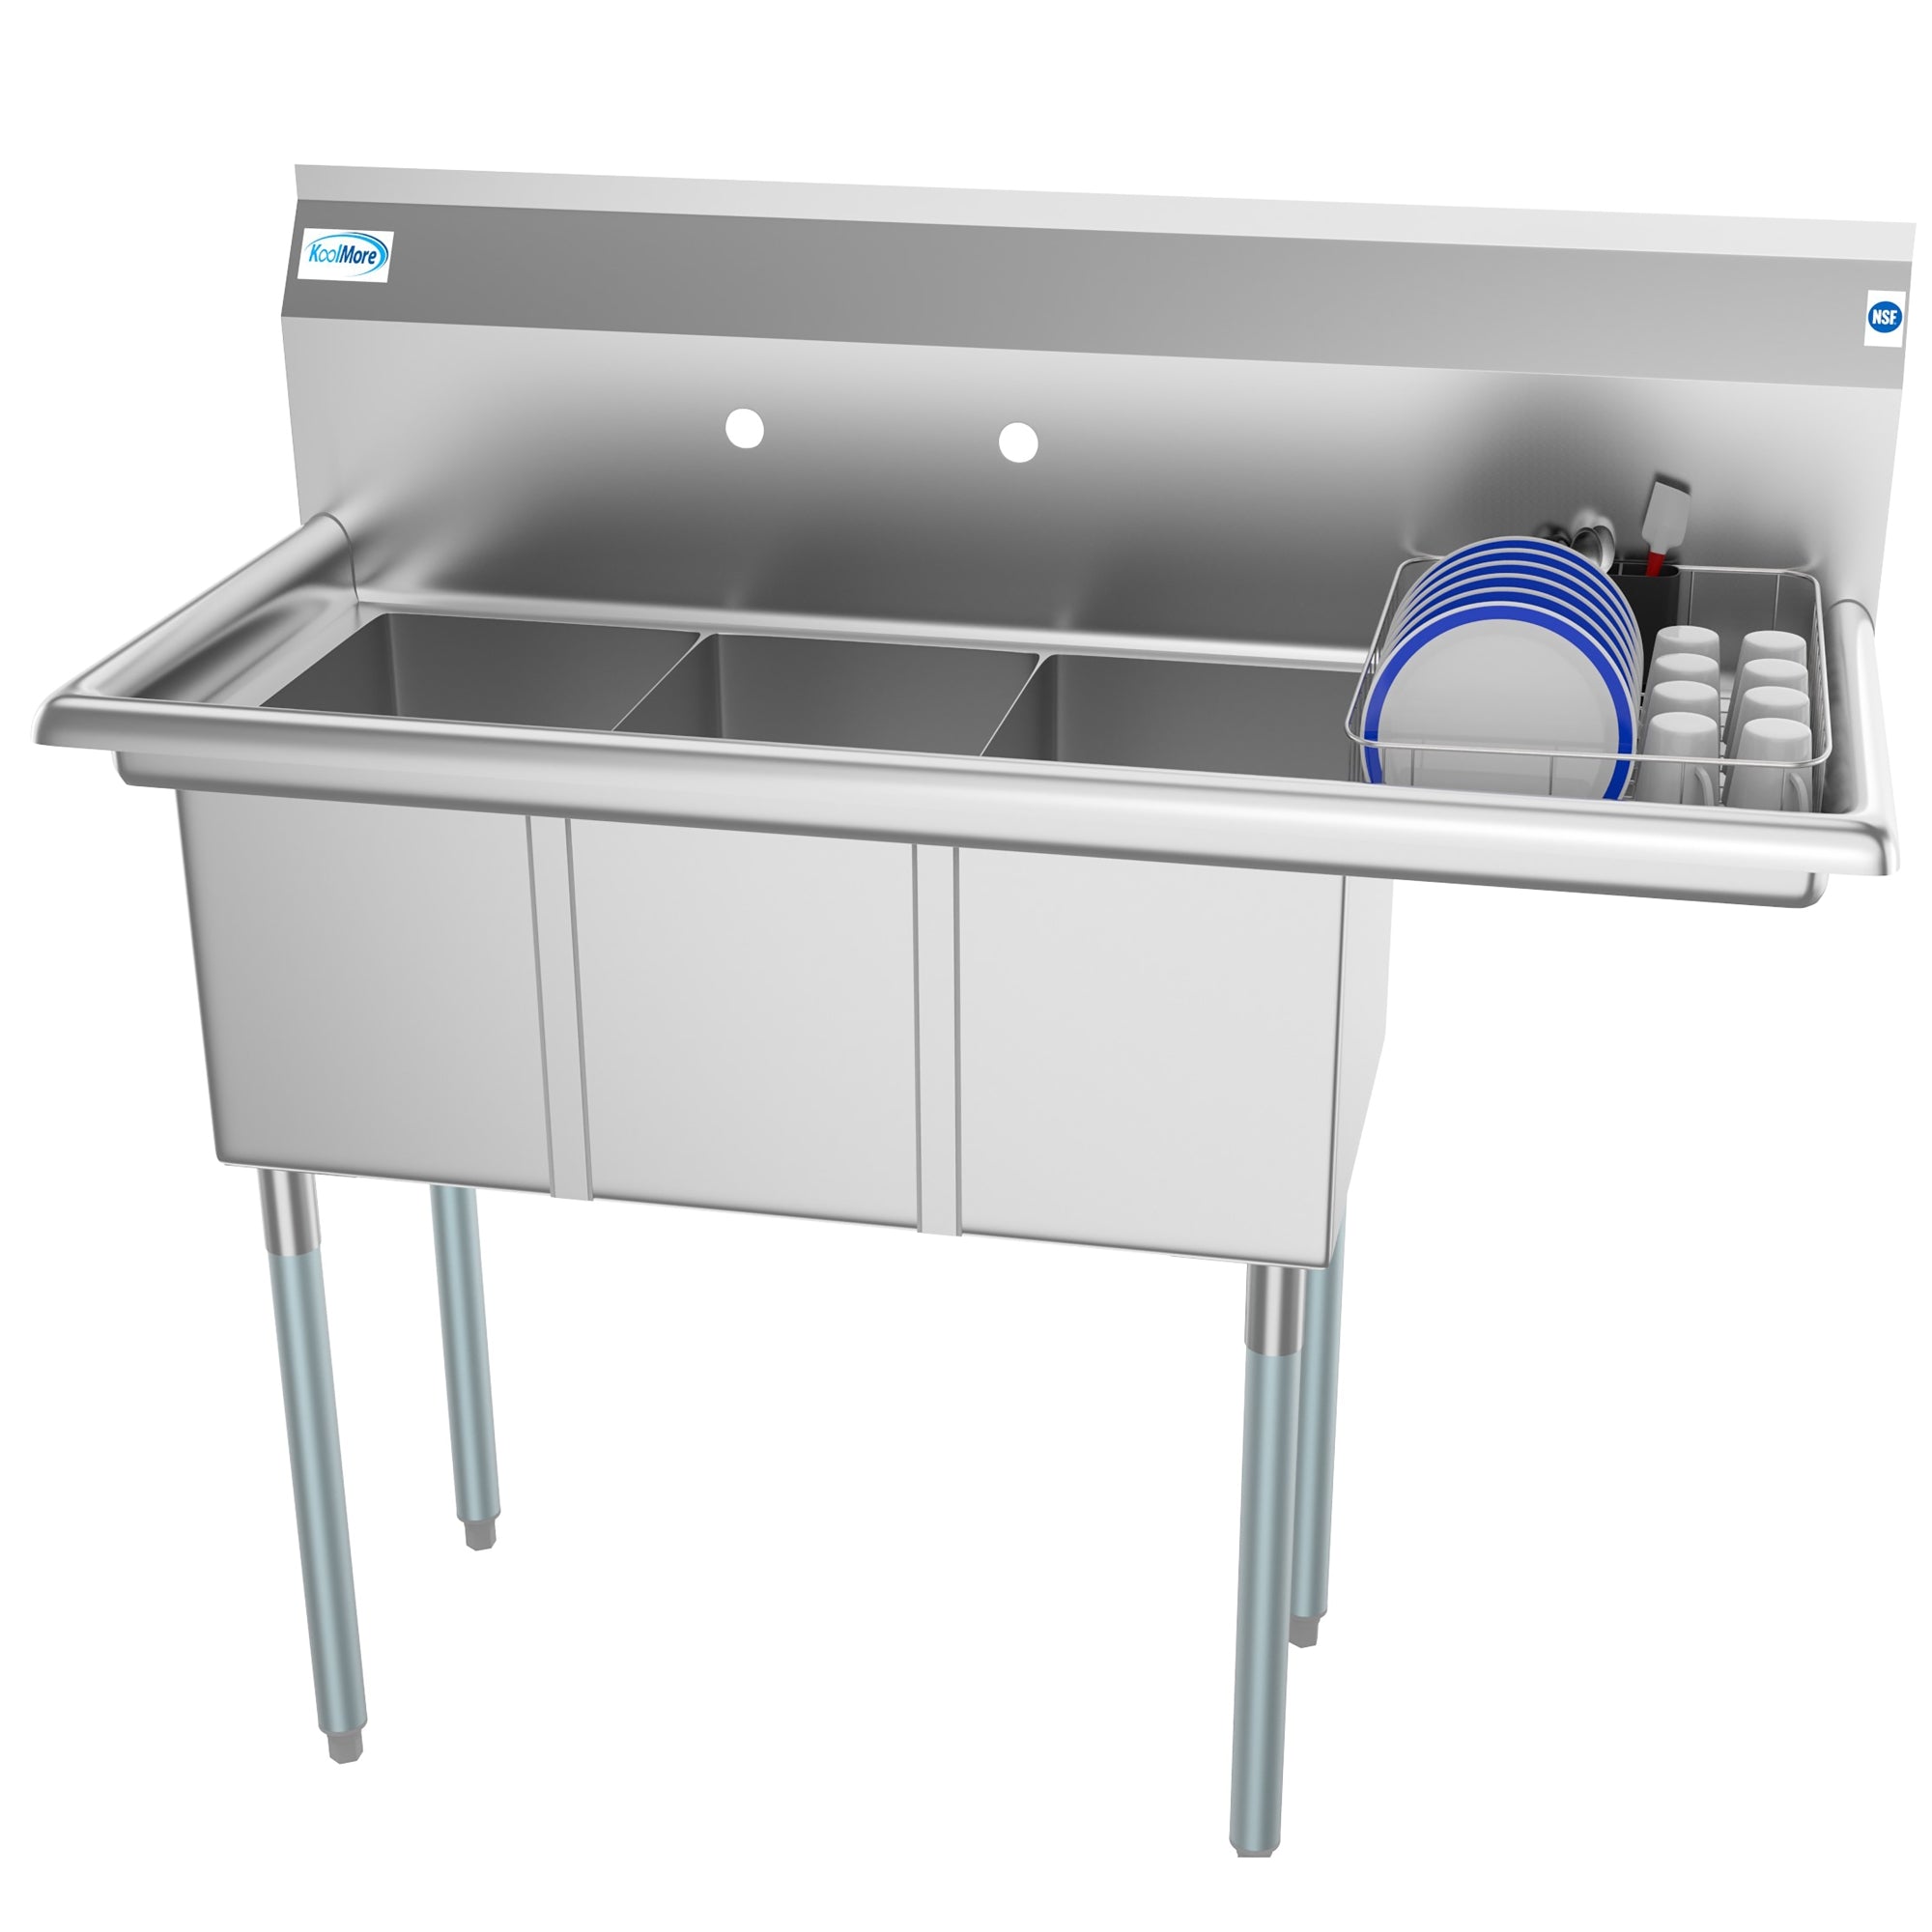 45 in. Three Compartment Stainless Steel Commercial Sink with Drainboard, Bowl Size 10